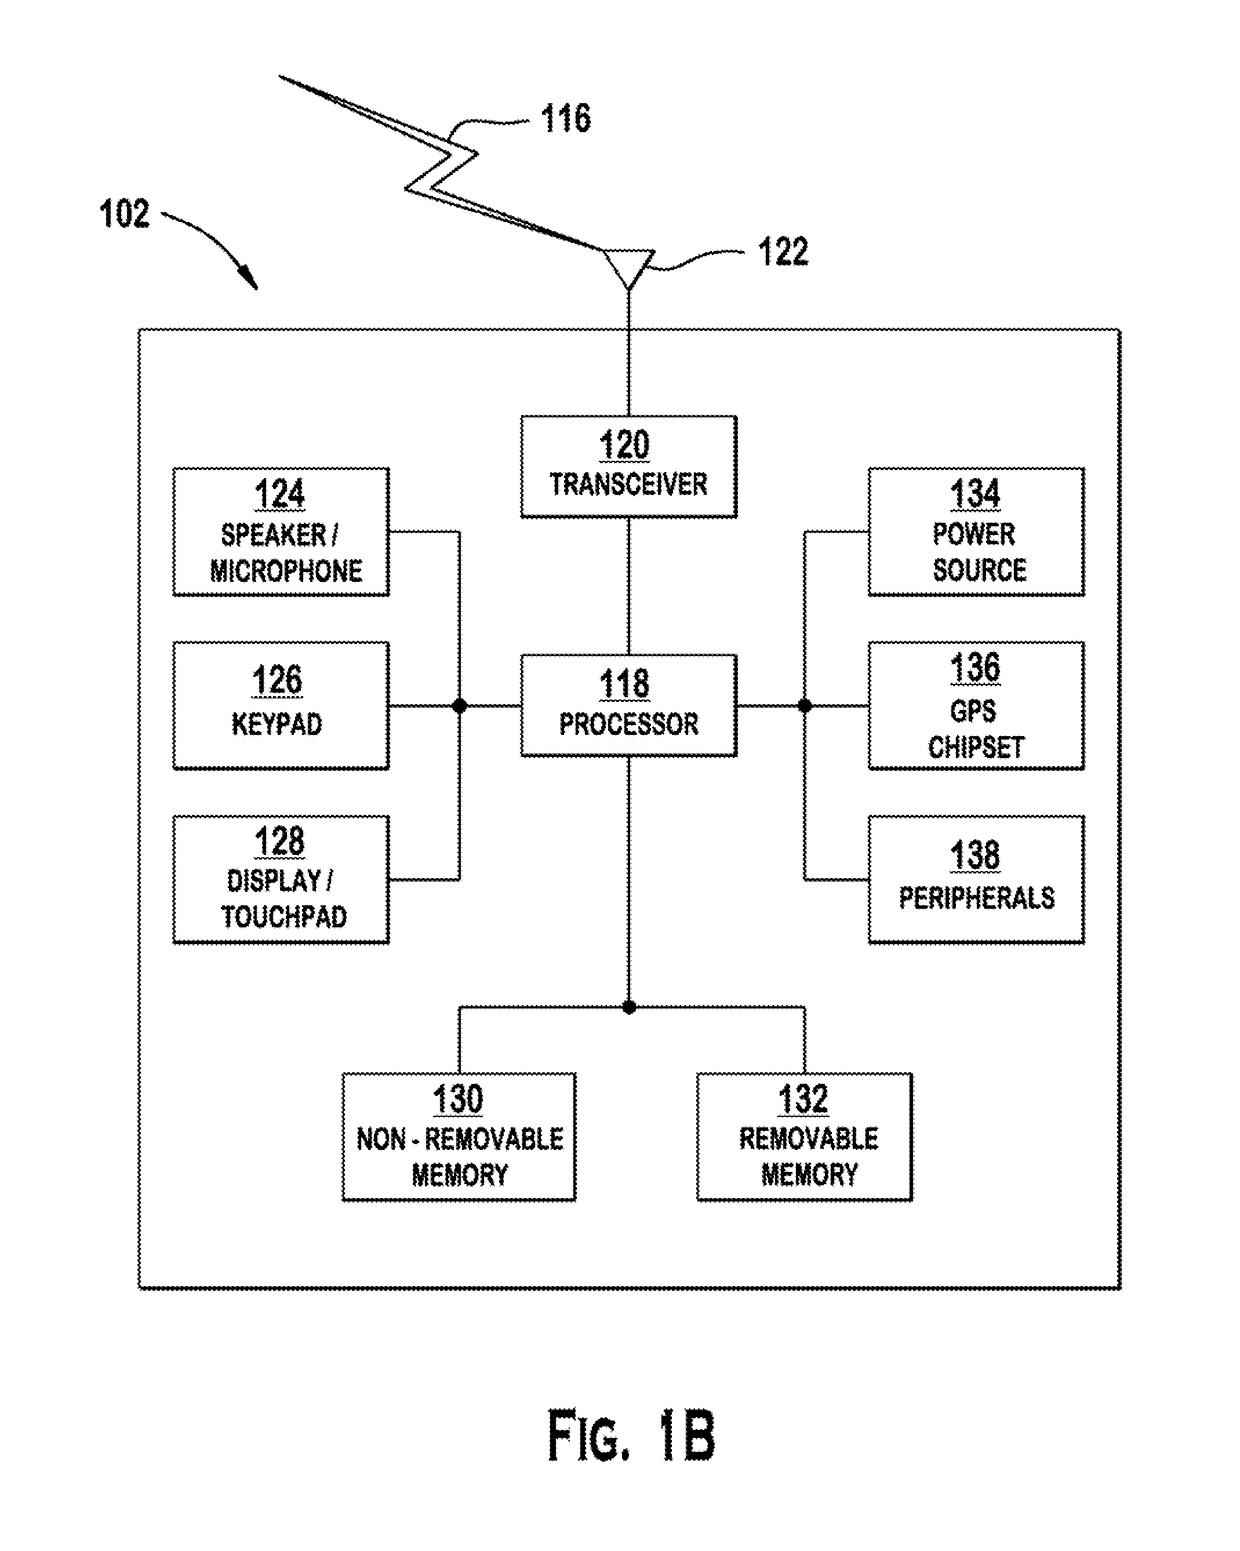 Method and apparatus for power savings in a wireless local area network